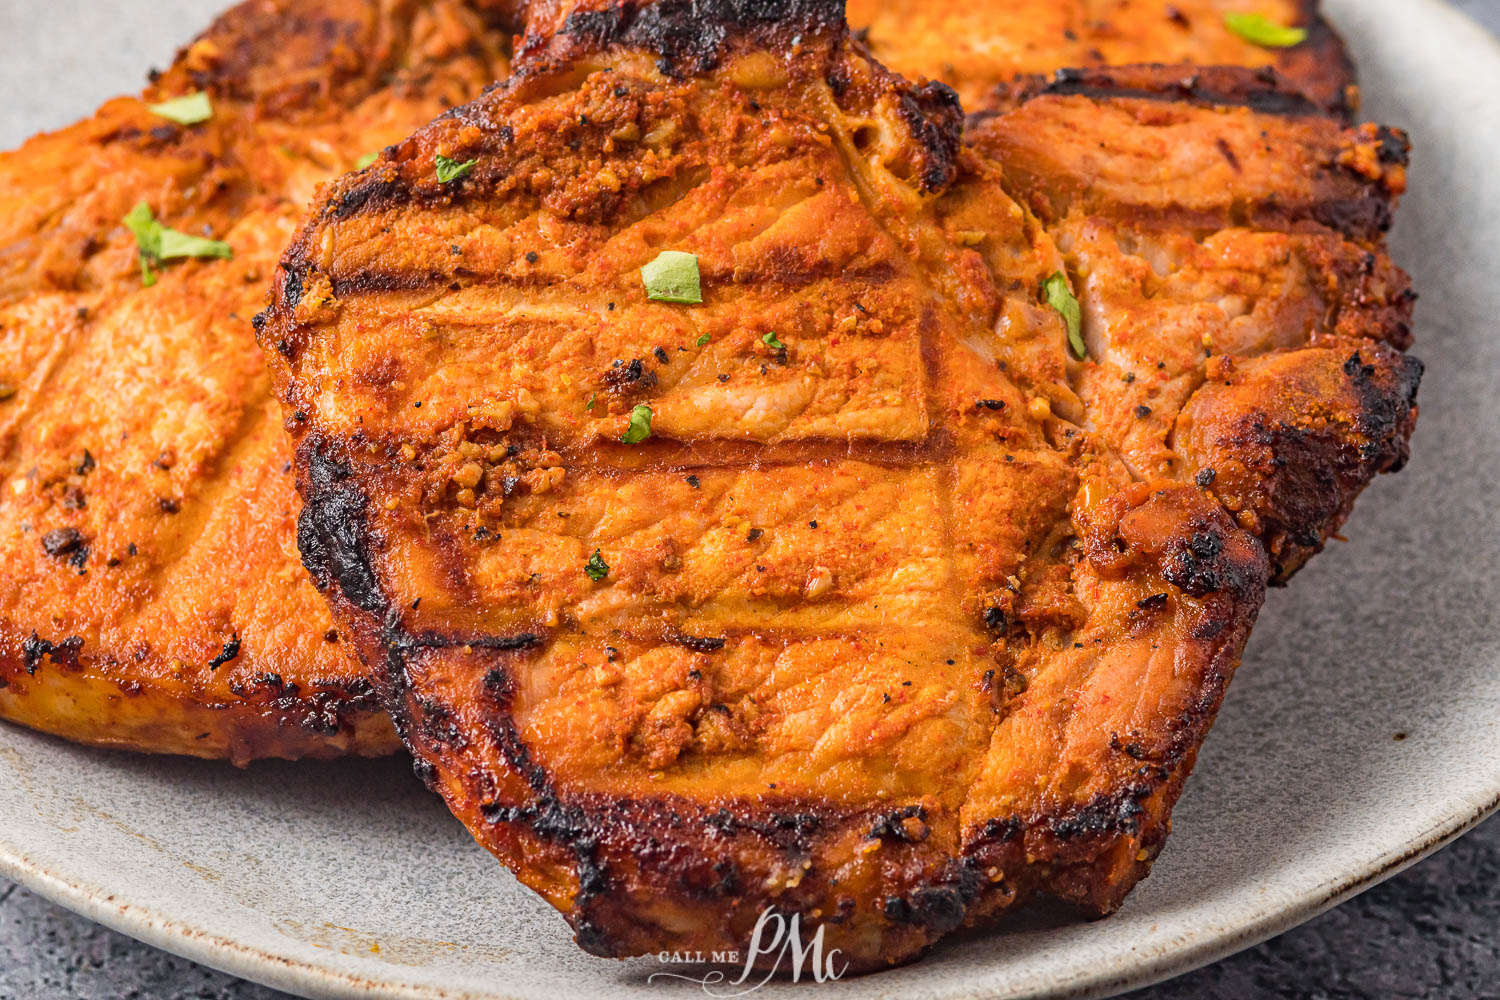  Grilled Pork Chops recipe seasoning & marinade with tips for the best grilled bone-in pork chops & sides to serve with.